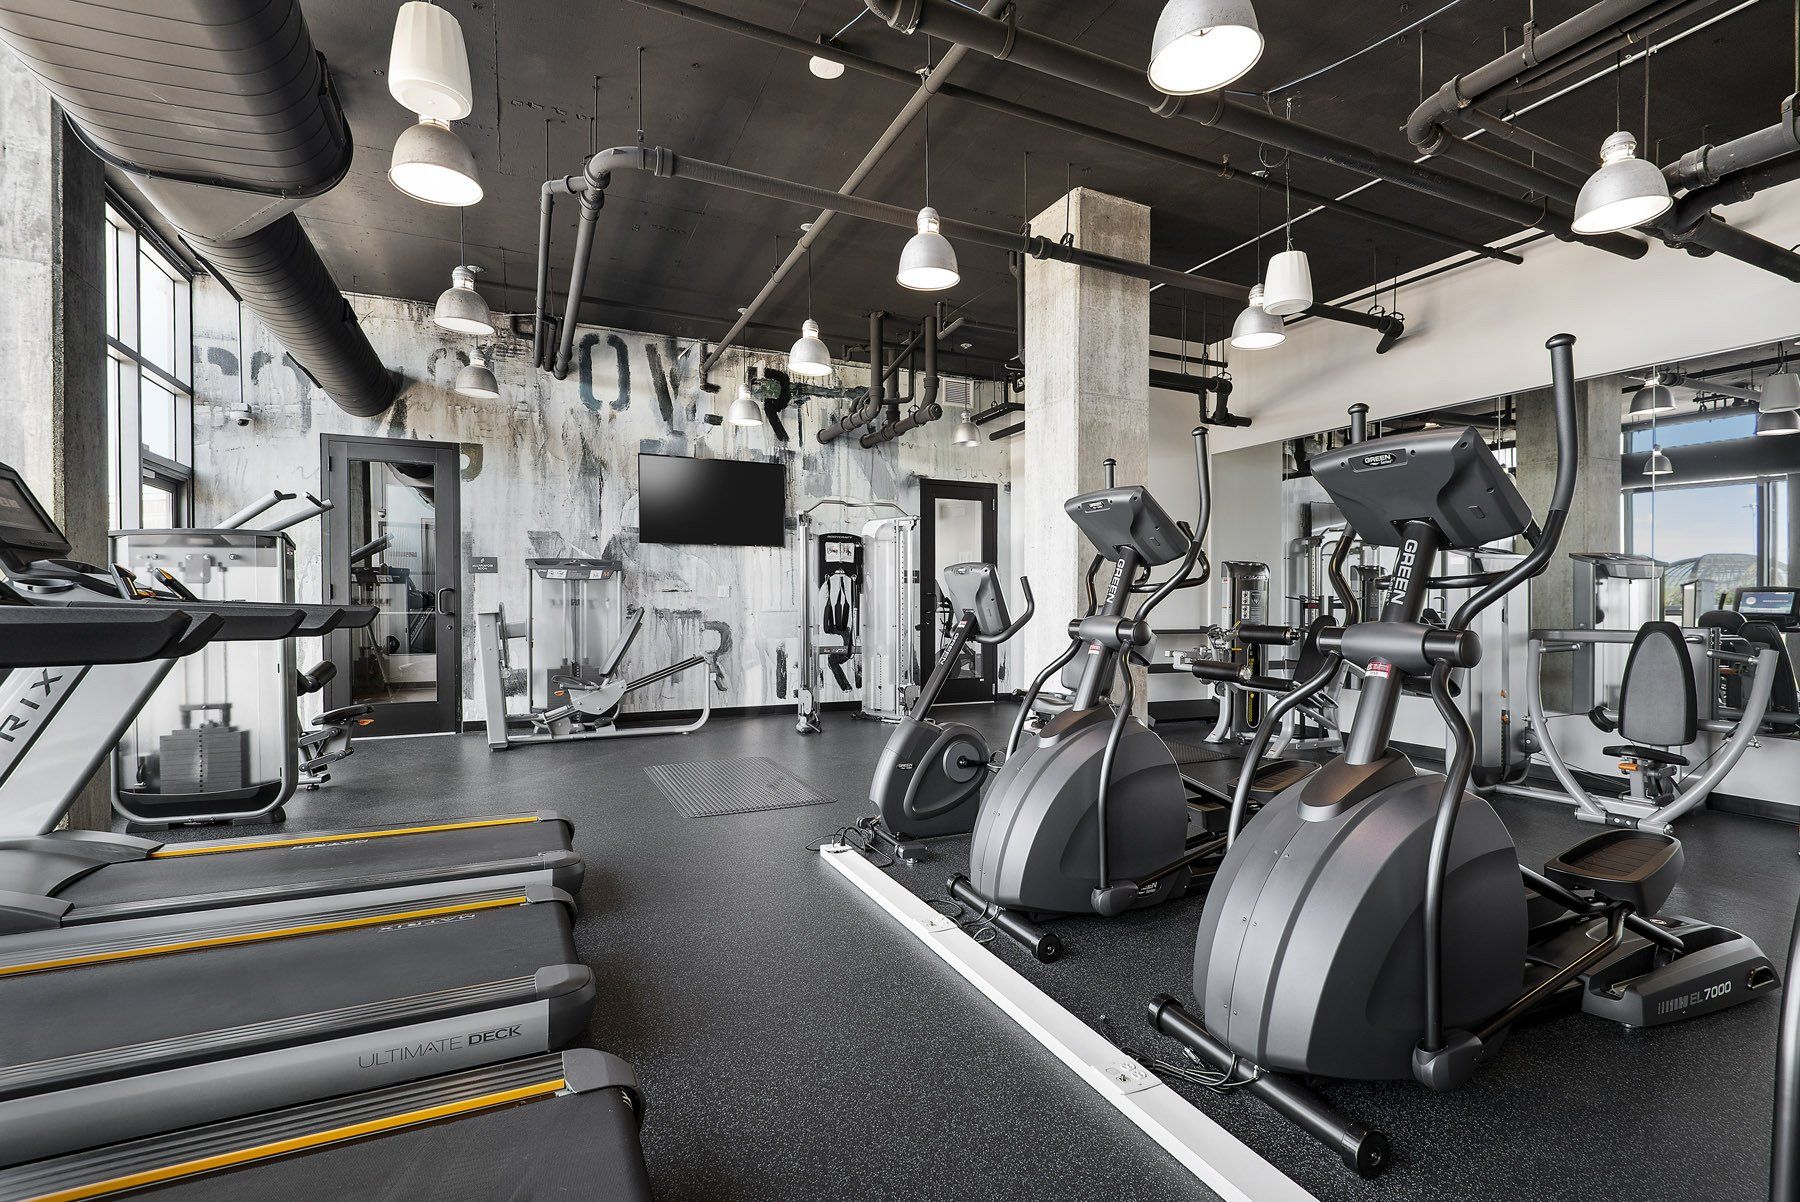 A gym with a lot of exercise equipment including treadmills and ellipticals at Reside on Green Street.